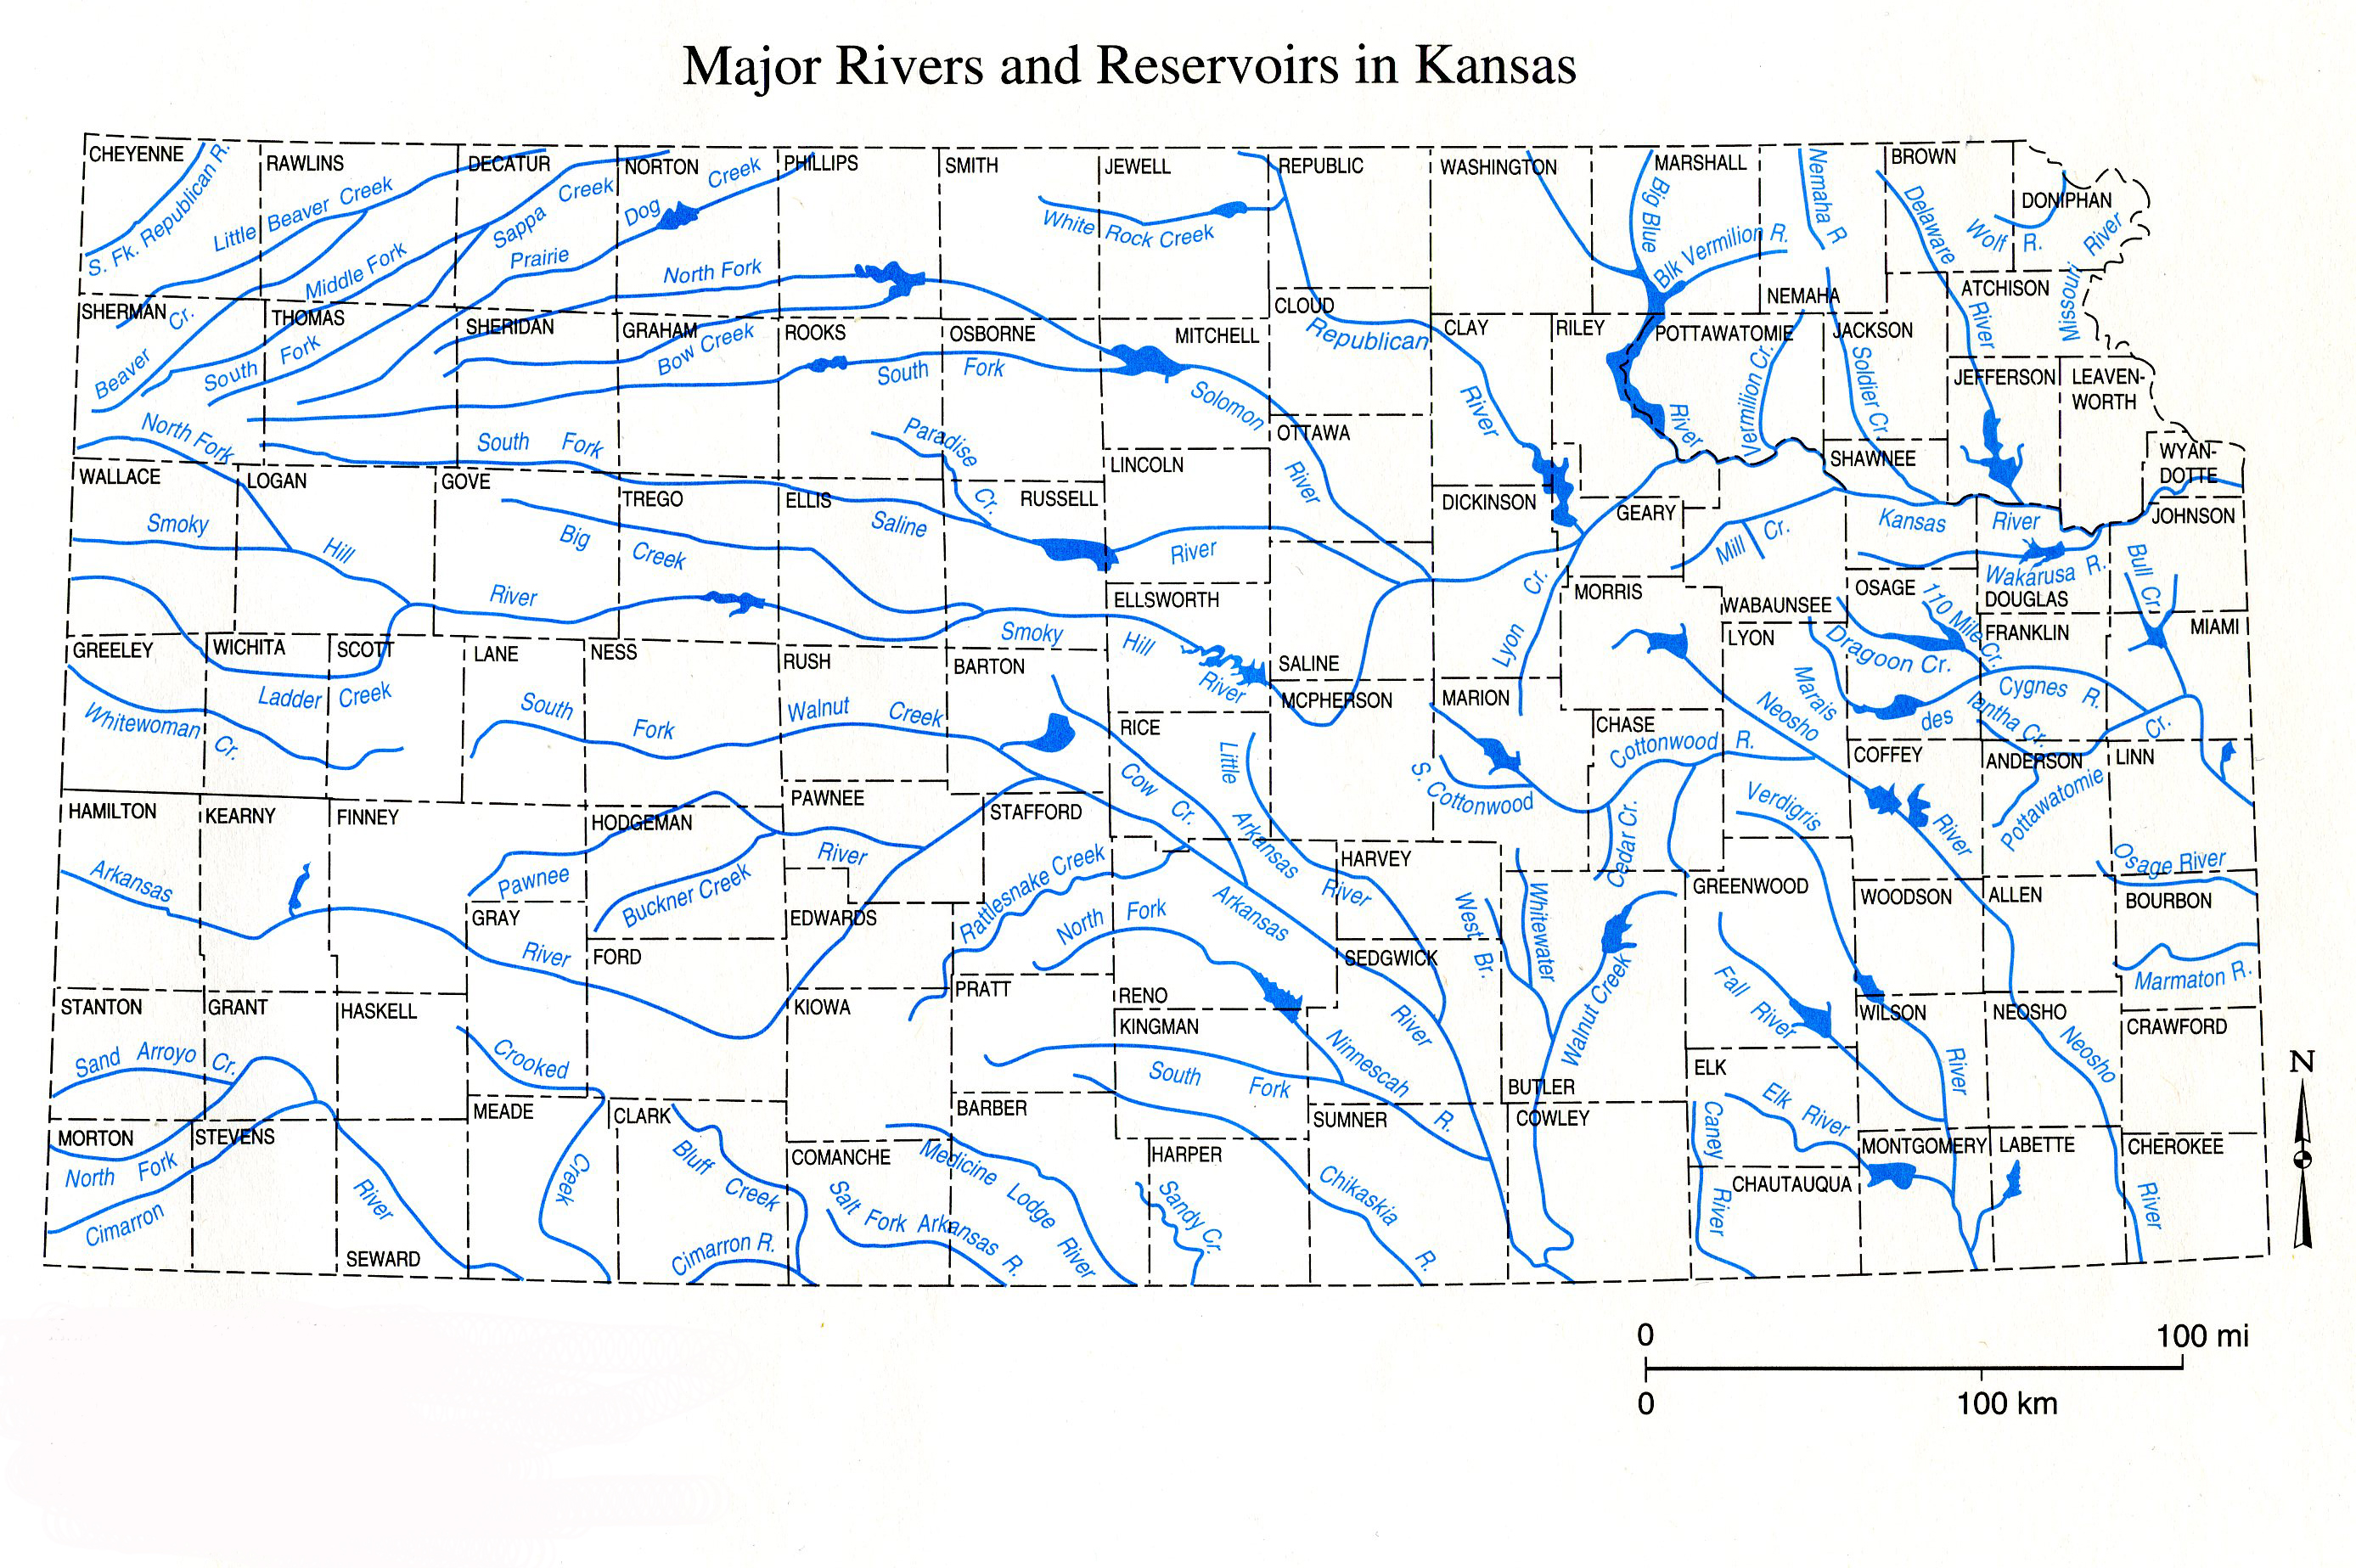 Map of major rivers and reservoirs in Kansas.